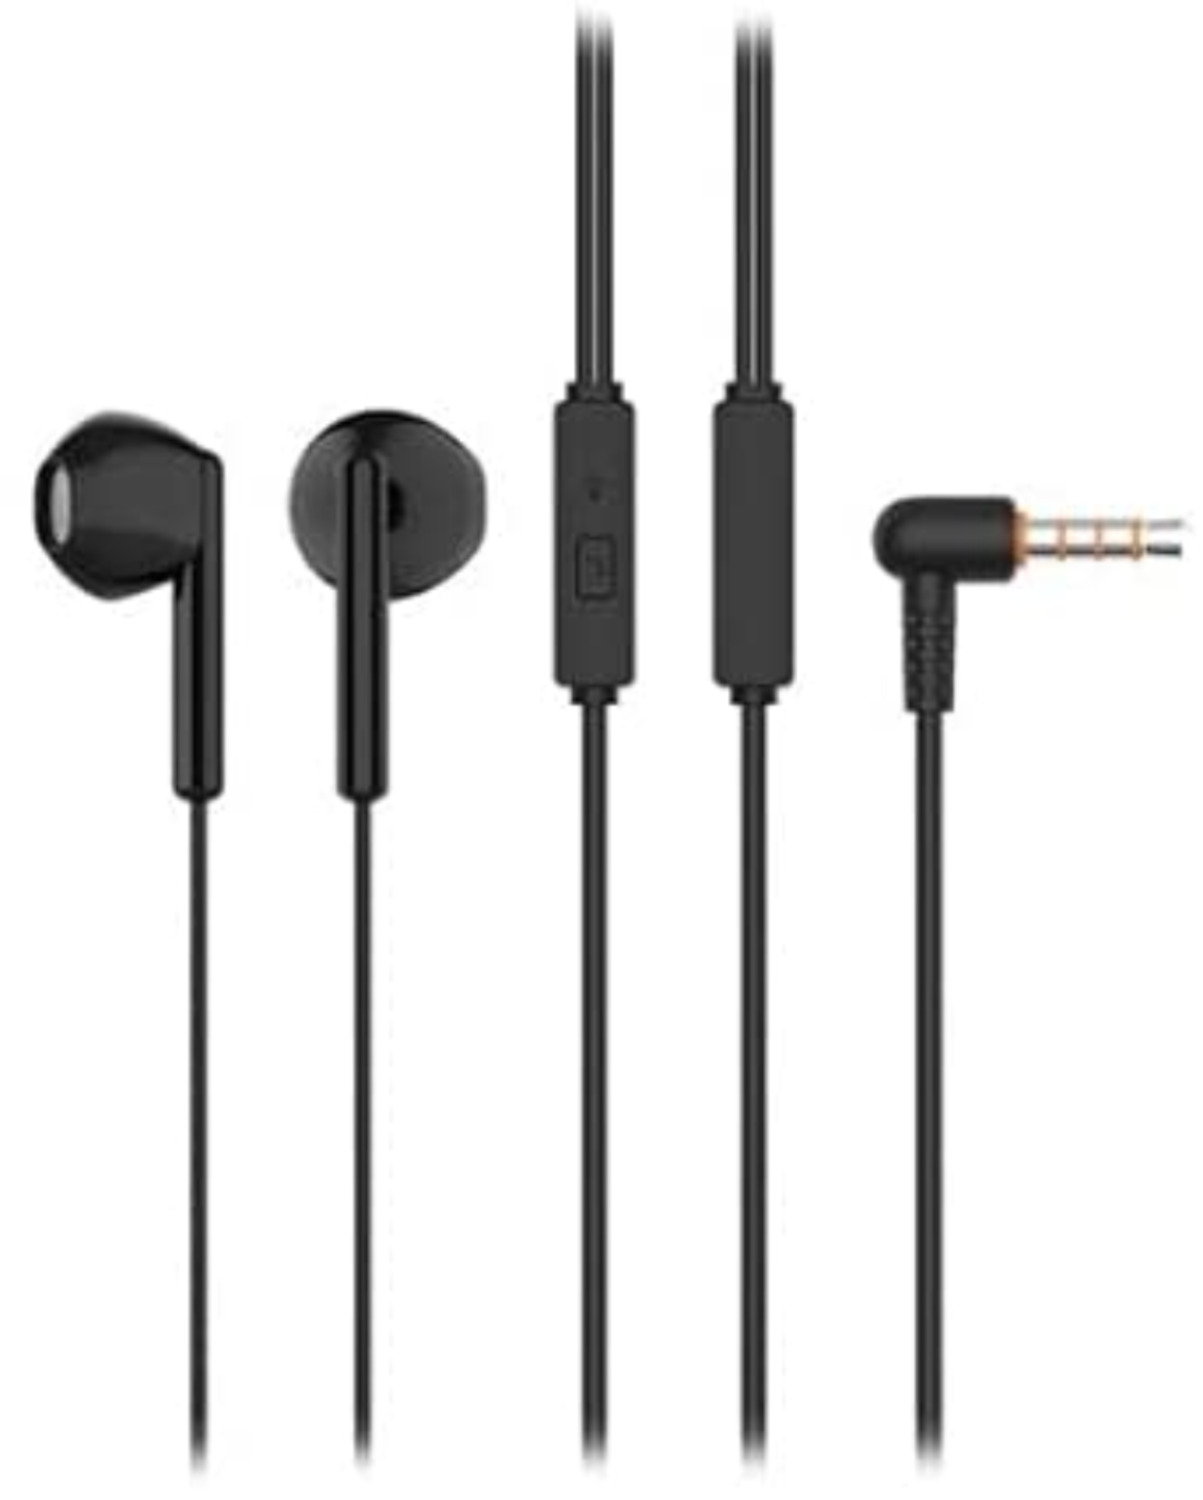 CELEBRAT G6 WIRED STEREO EARPHONE WITH MICROPHONE - BLACK